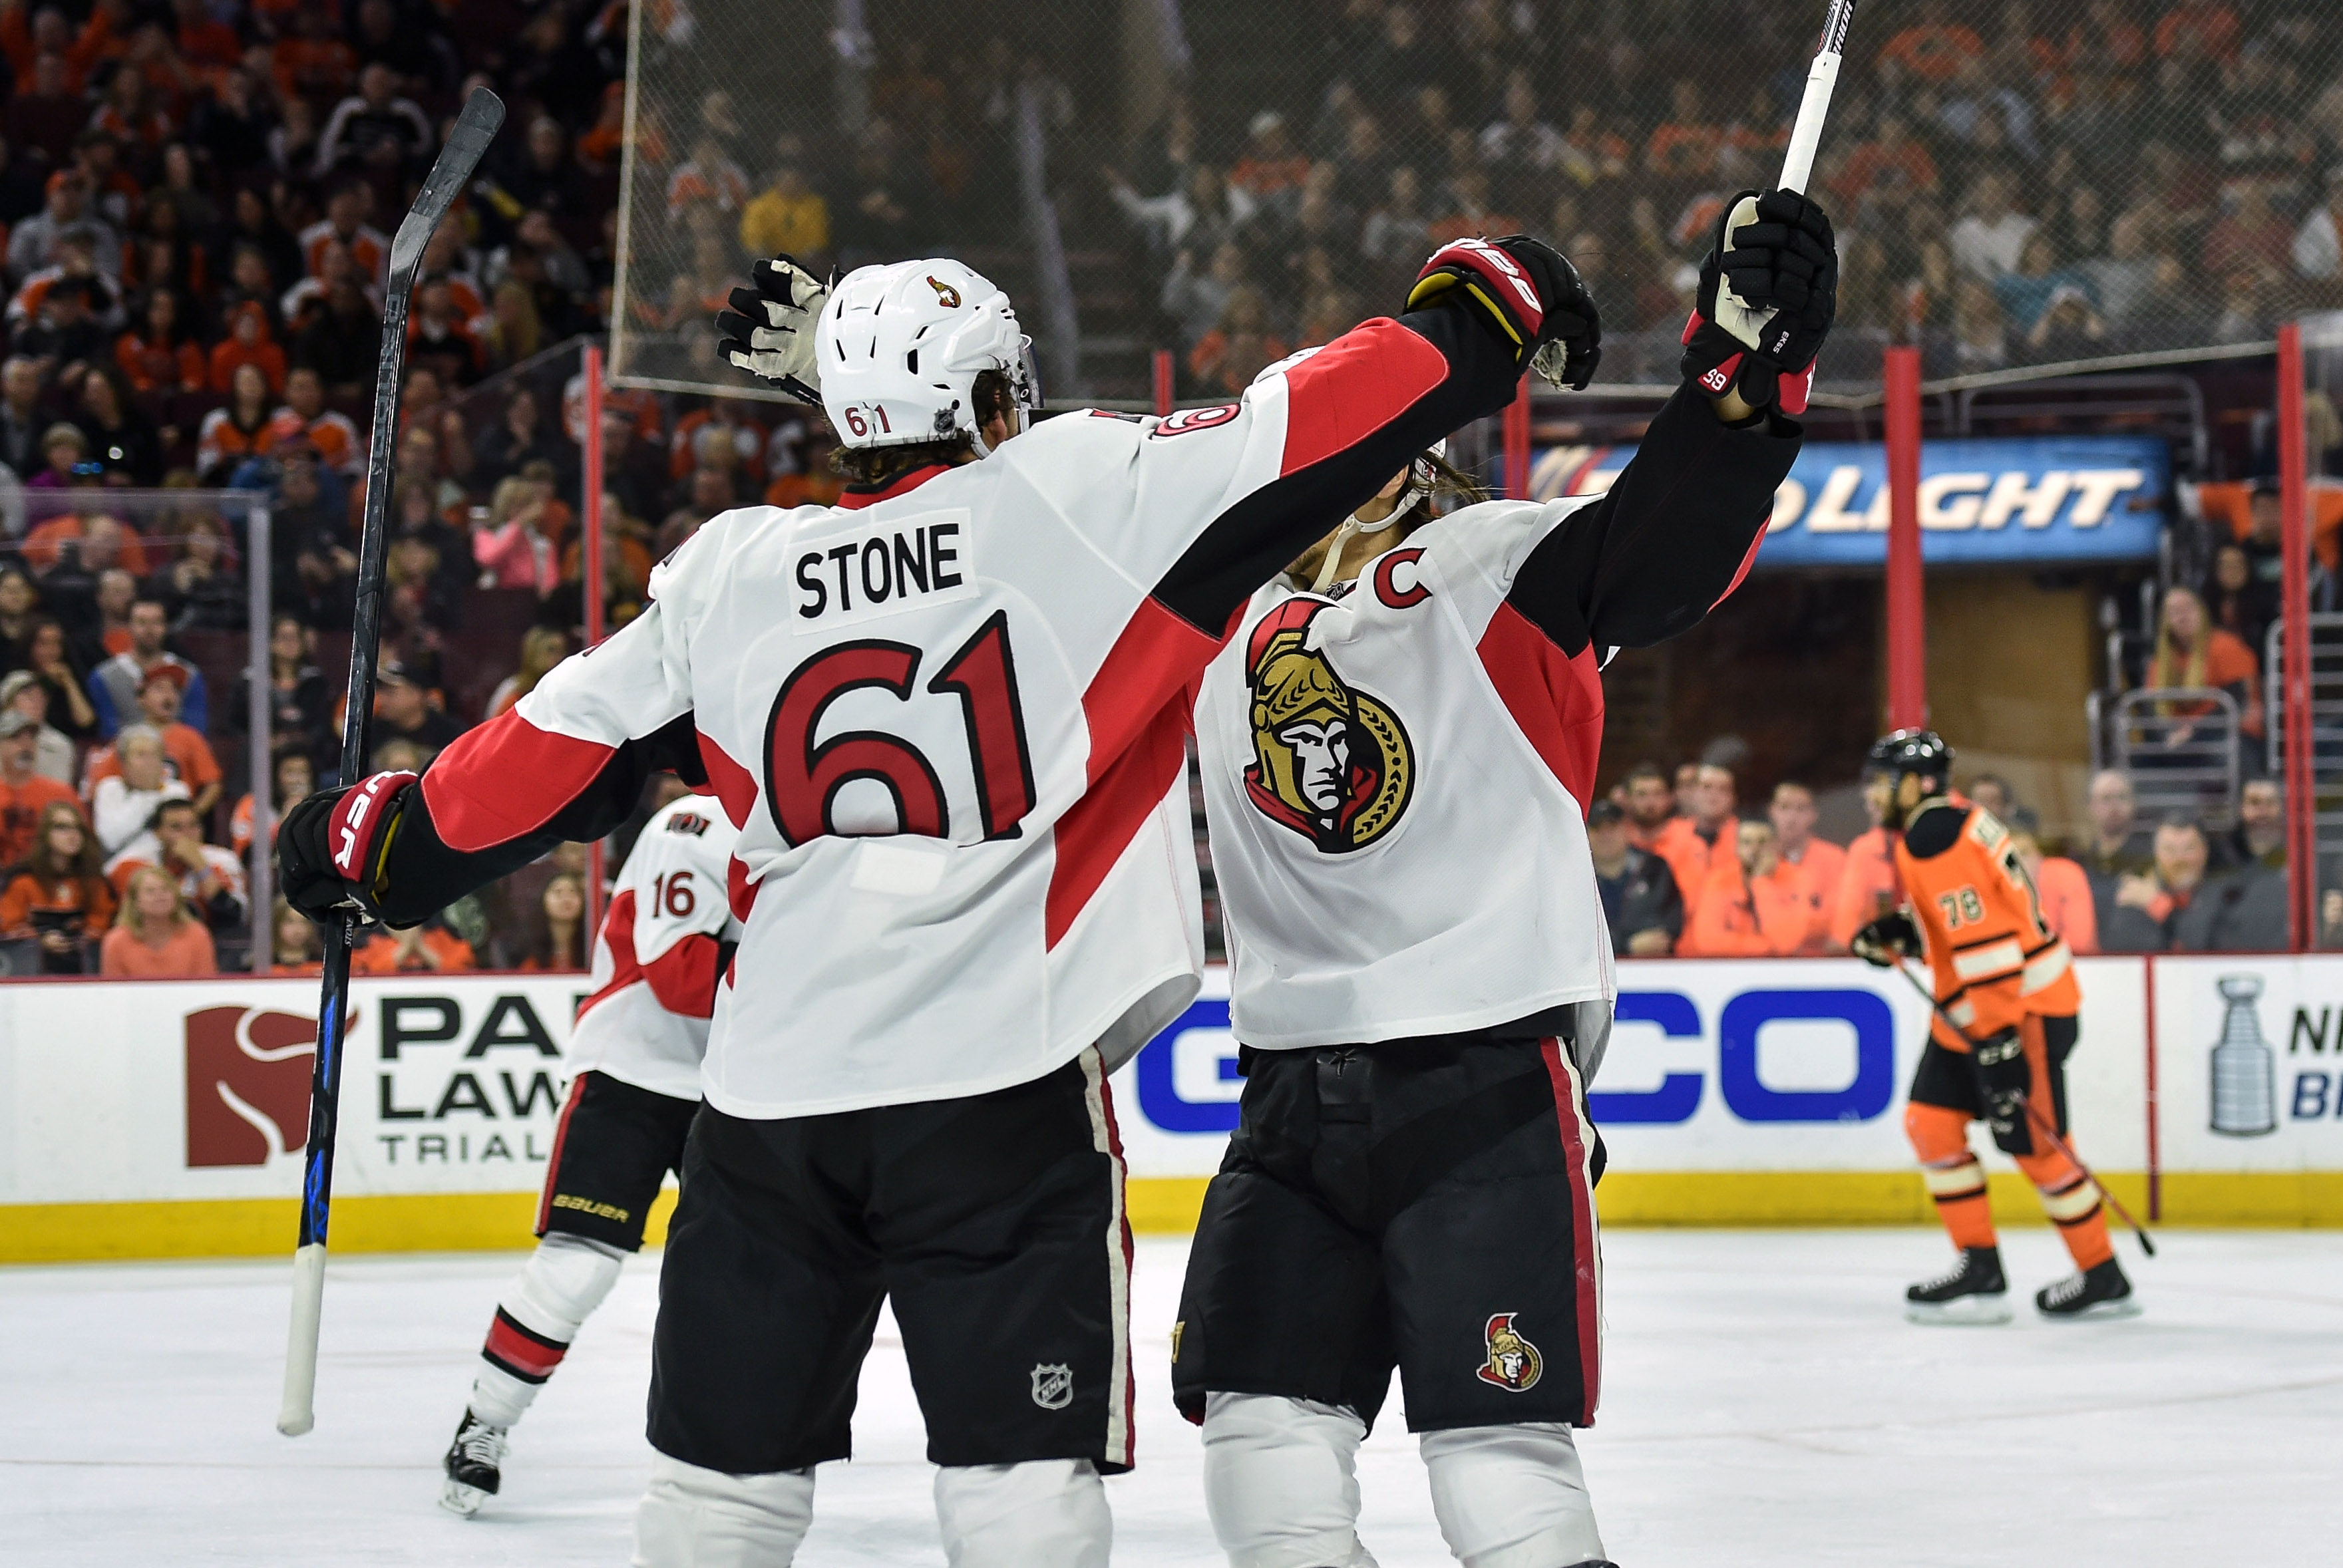 Mark Stone celebrates his  first of two goals against the Flyers. (John Geliebter, USA TODAY Sports)